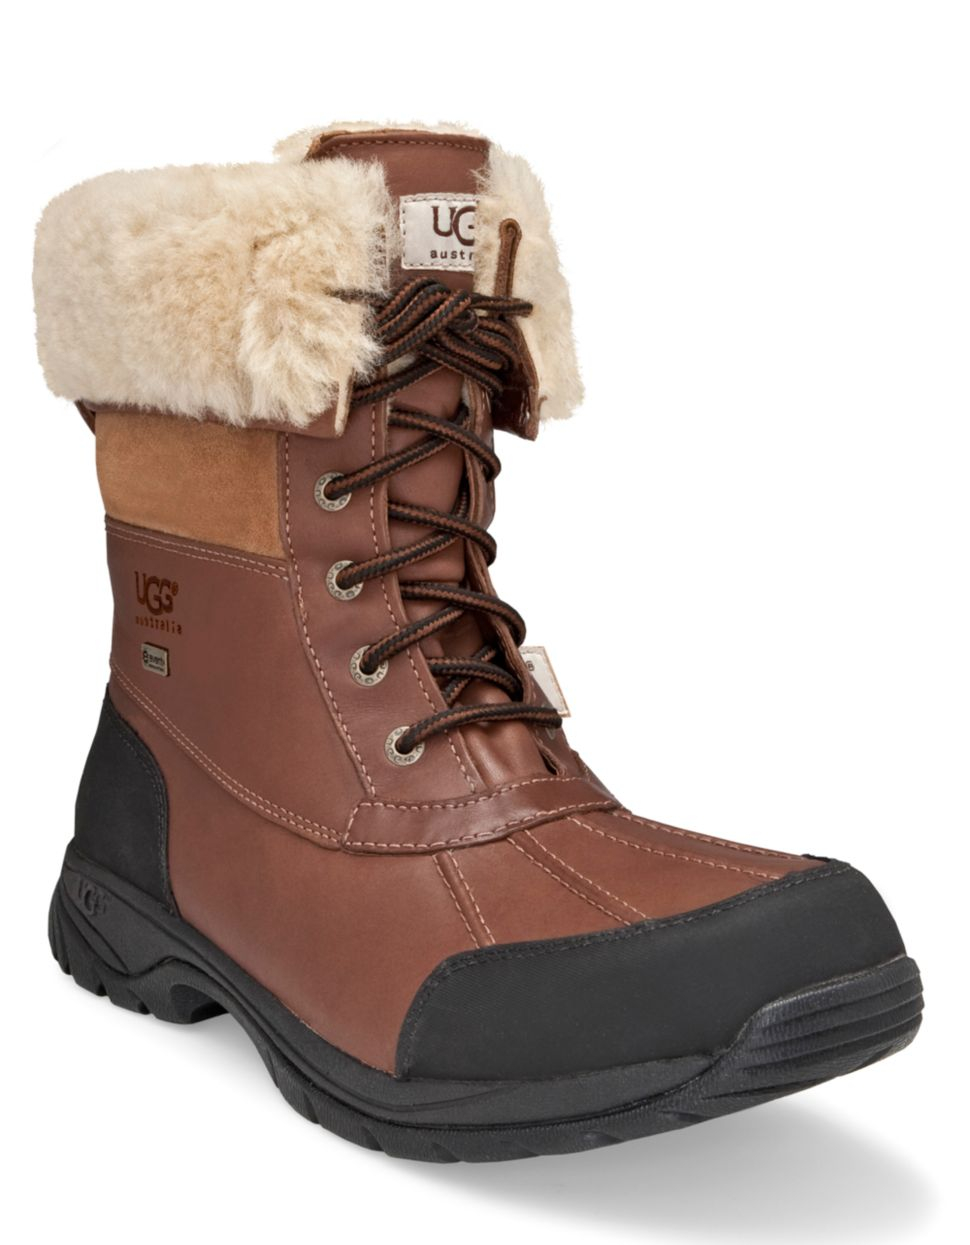 UGG Mens Butte Sheepskin Leather Boots in Brown for Men - Lyst